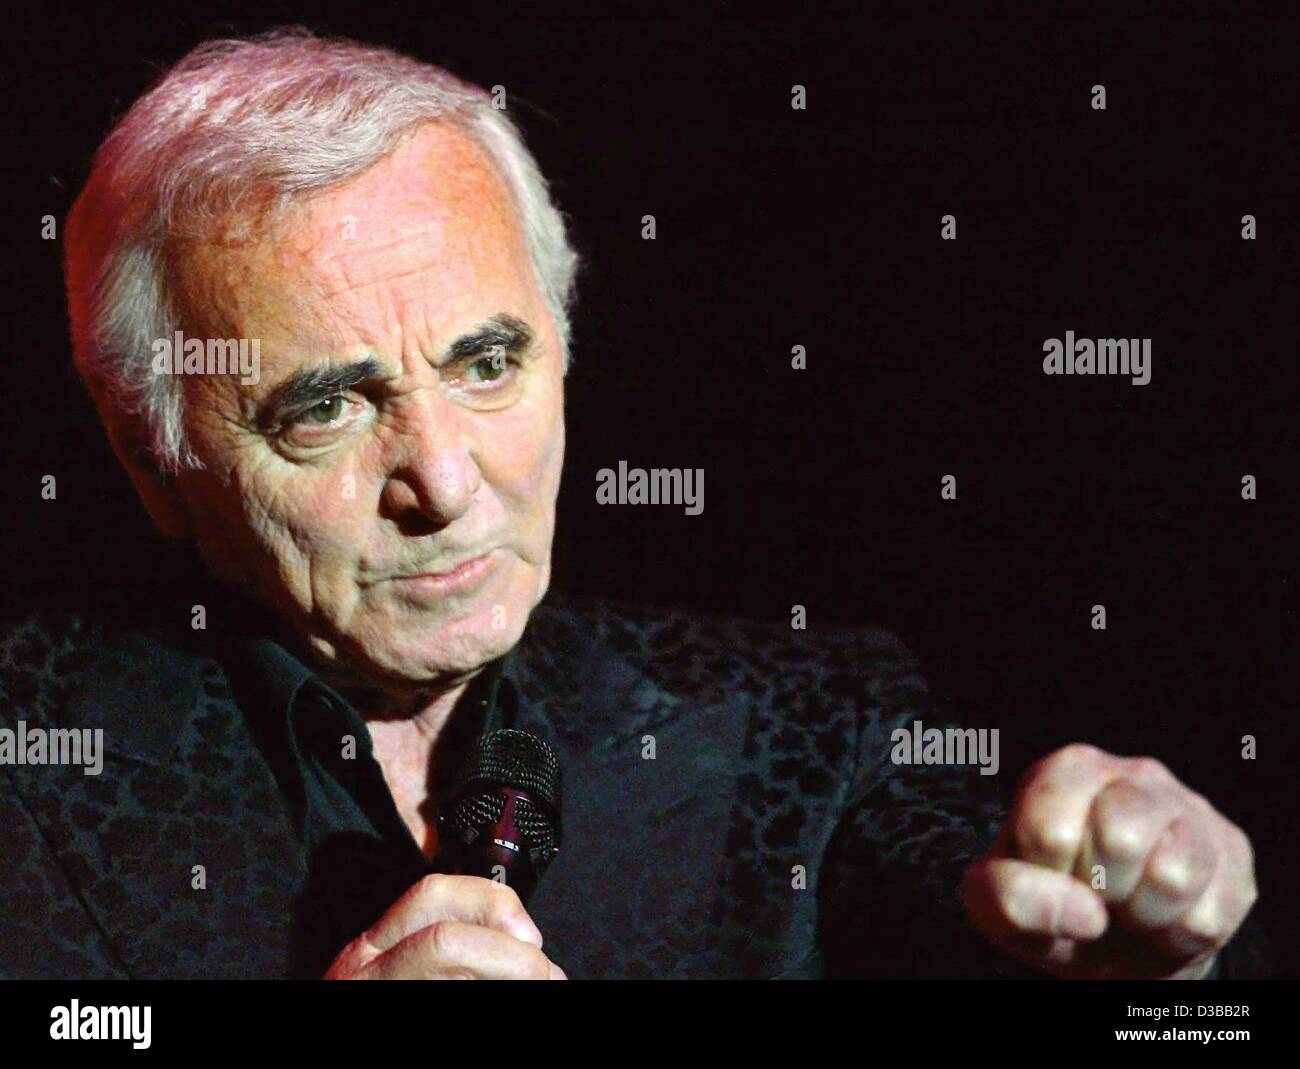 (dpa) - French chanson singer Charles Aznavour performs during his world tour in Hamburg, 5 October 2002. The 78-year-old tours the world as a farewell before retiring. However, he wants to continue singing every now and then. Aznavour had started his career about 64 years ago. Stock Photo